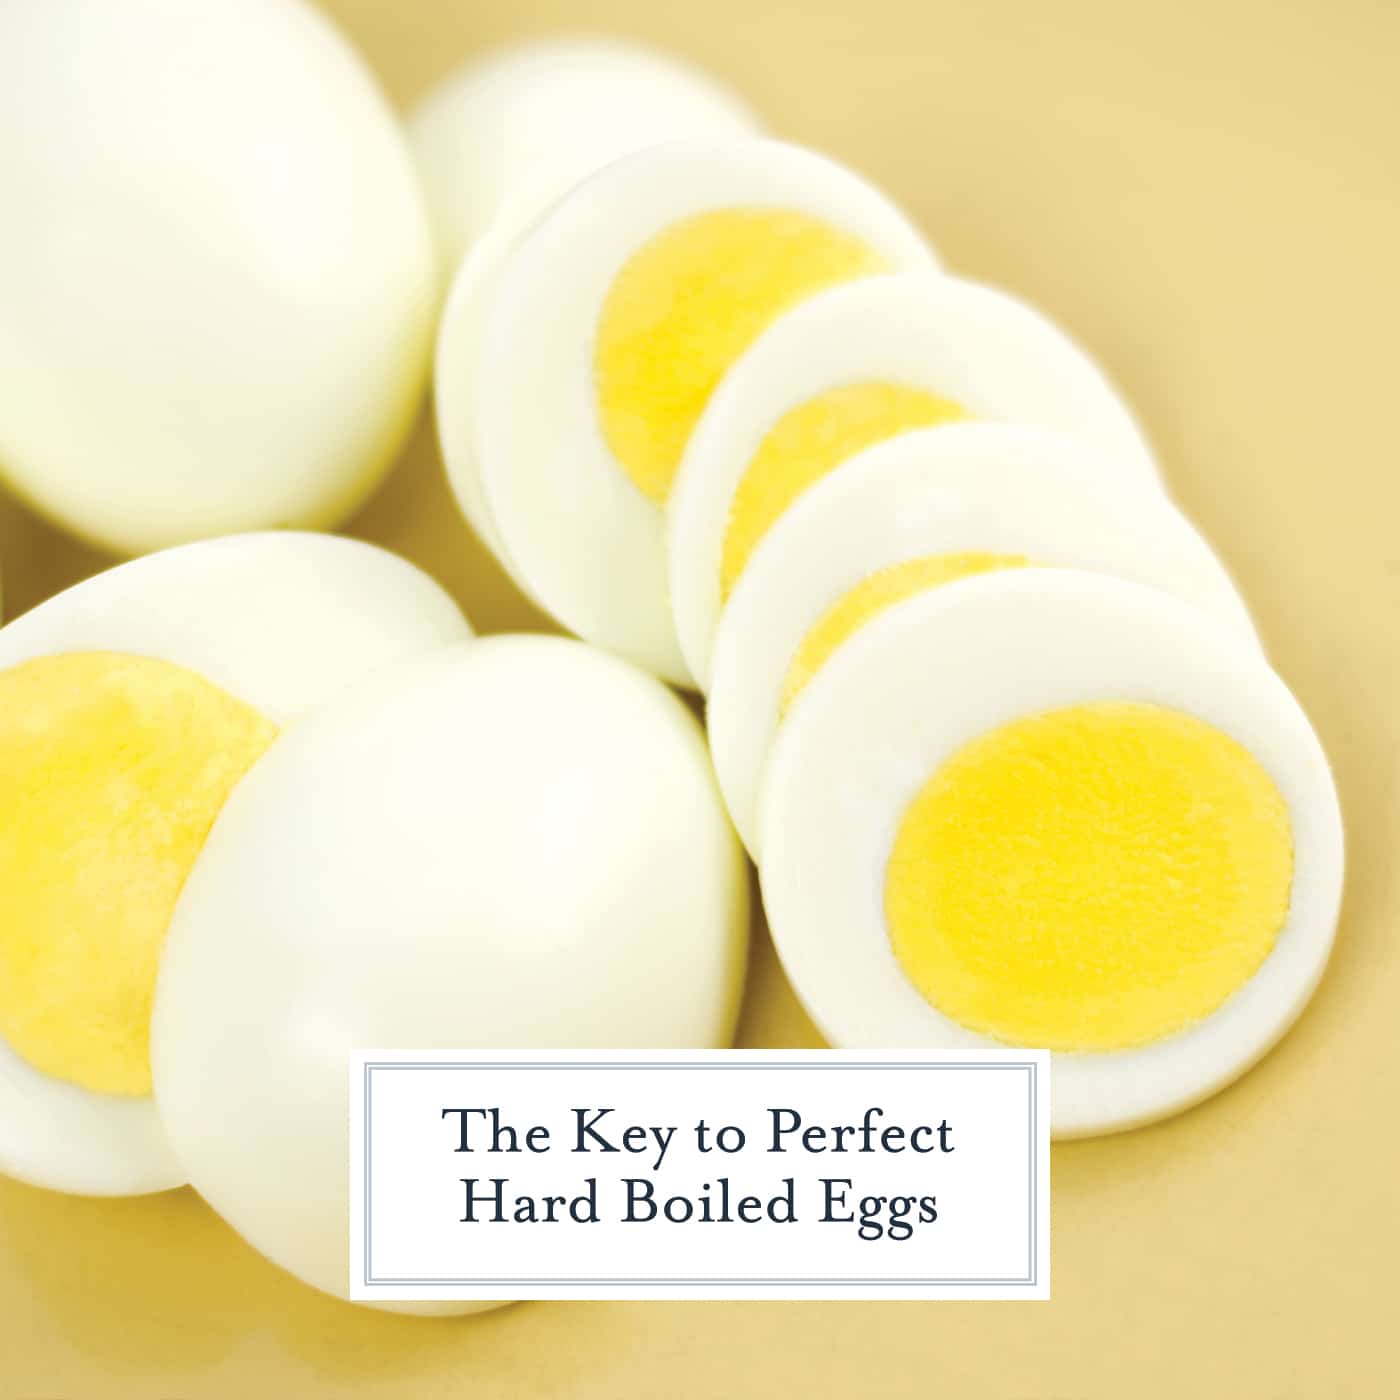 Perfect hard boiled eggs, sliced with yellow yolk